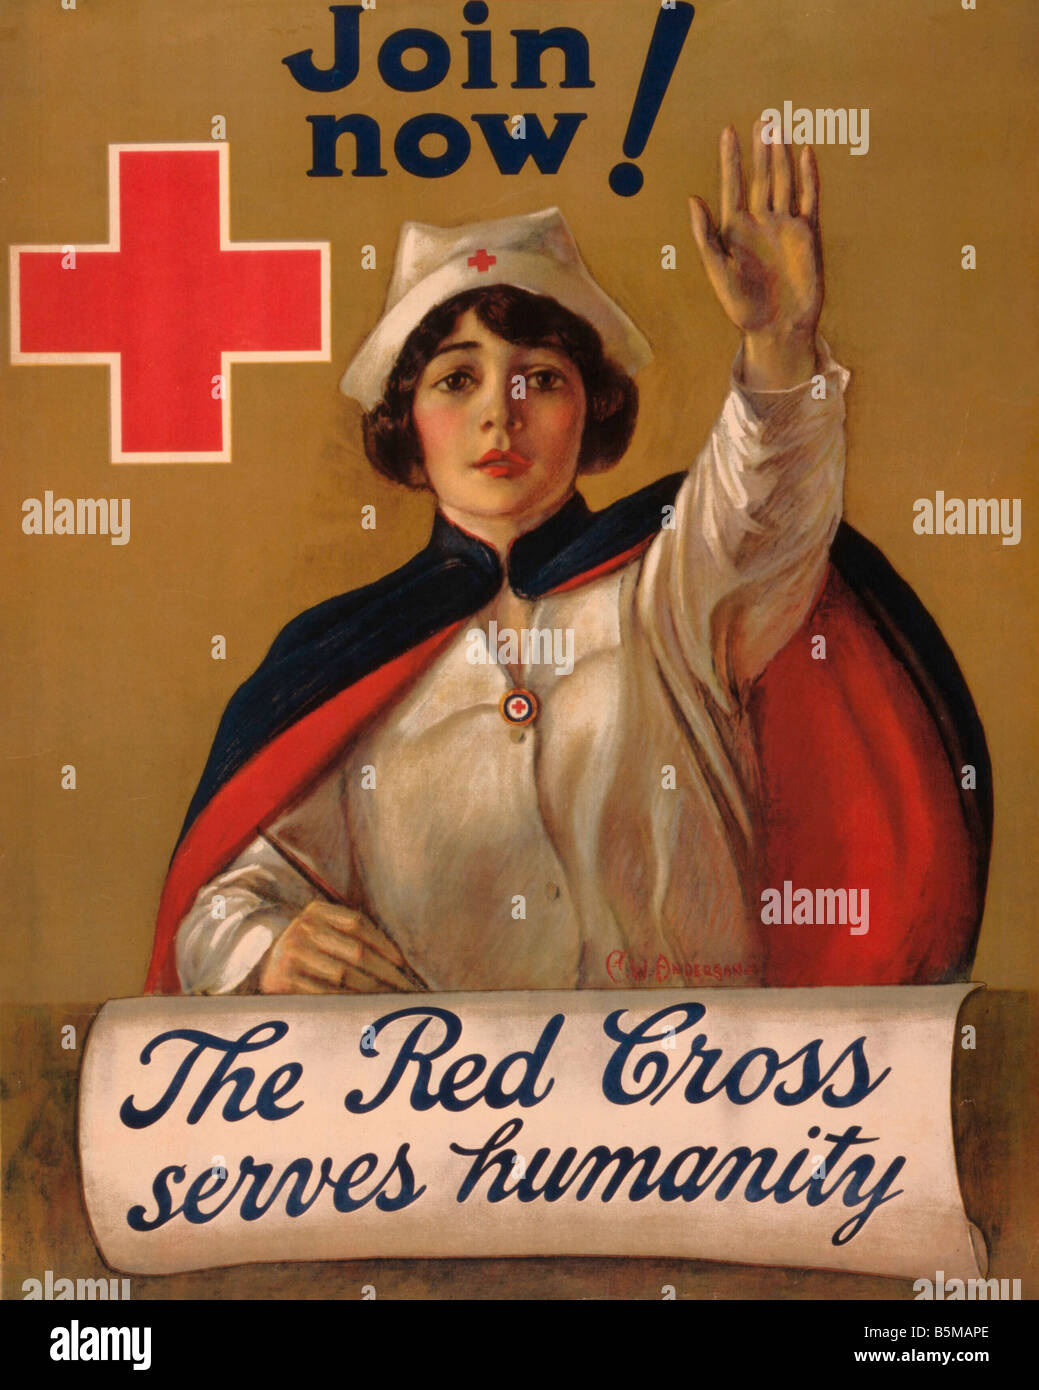 2 M20 R3 1914 Red Cross Recruiting USA Poster 1914 Medicine Red Cross Join now The Red Cross serves hu manity recruiting campaig Stock Photo